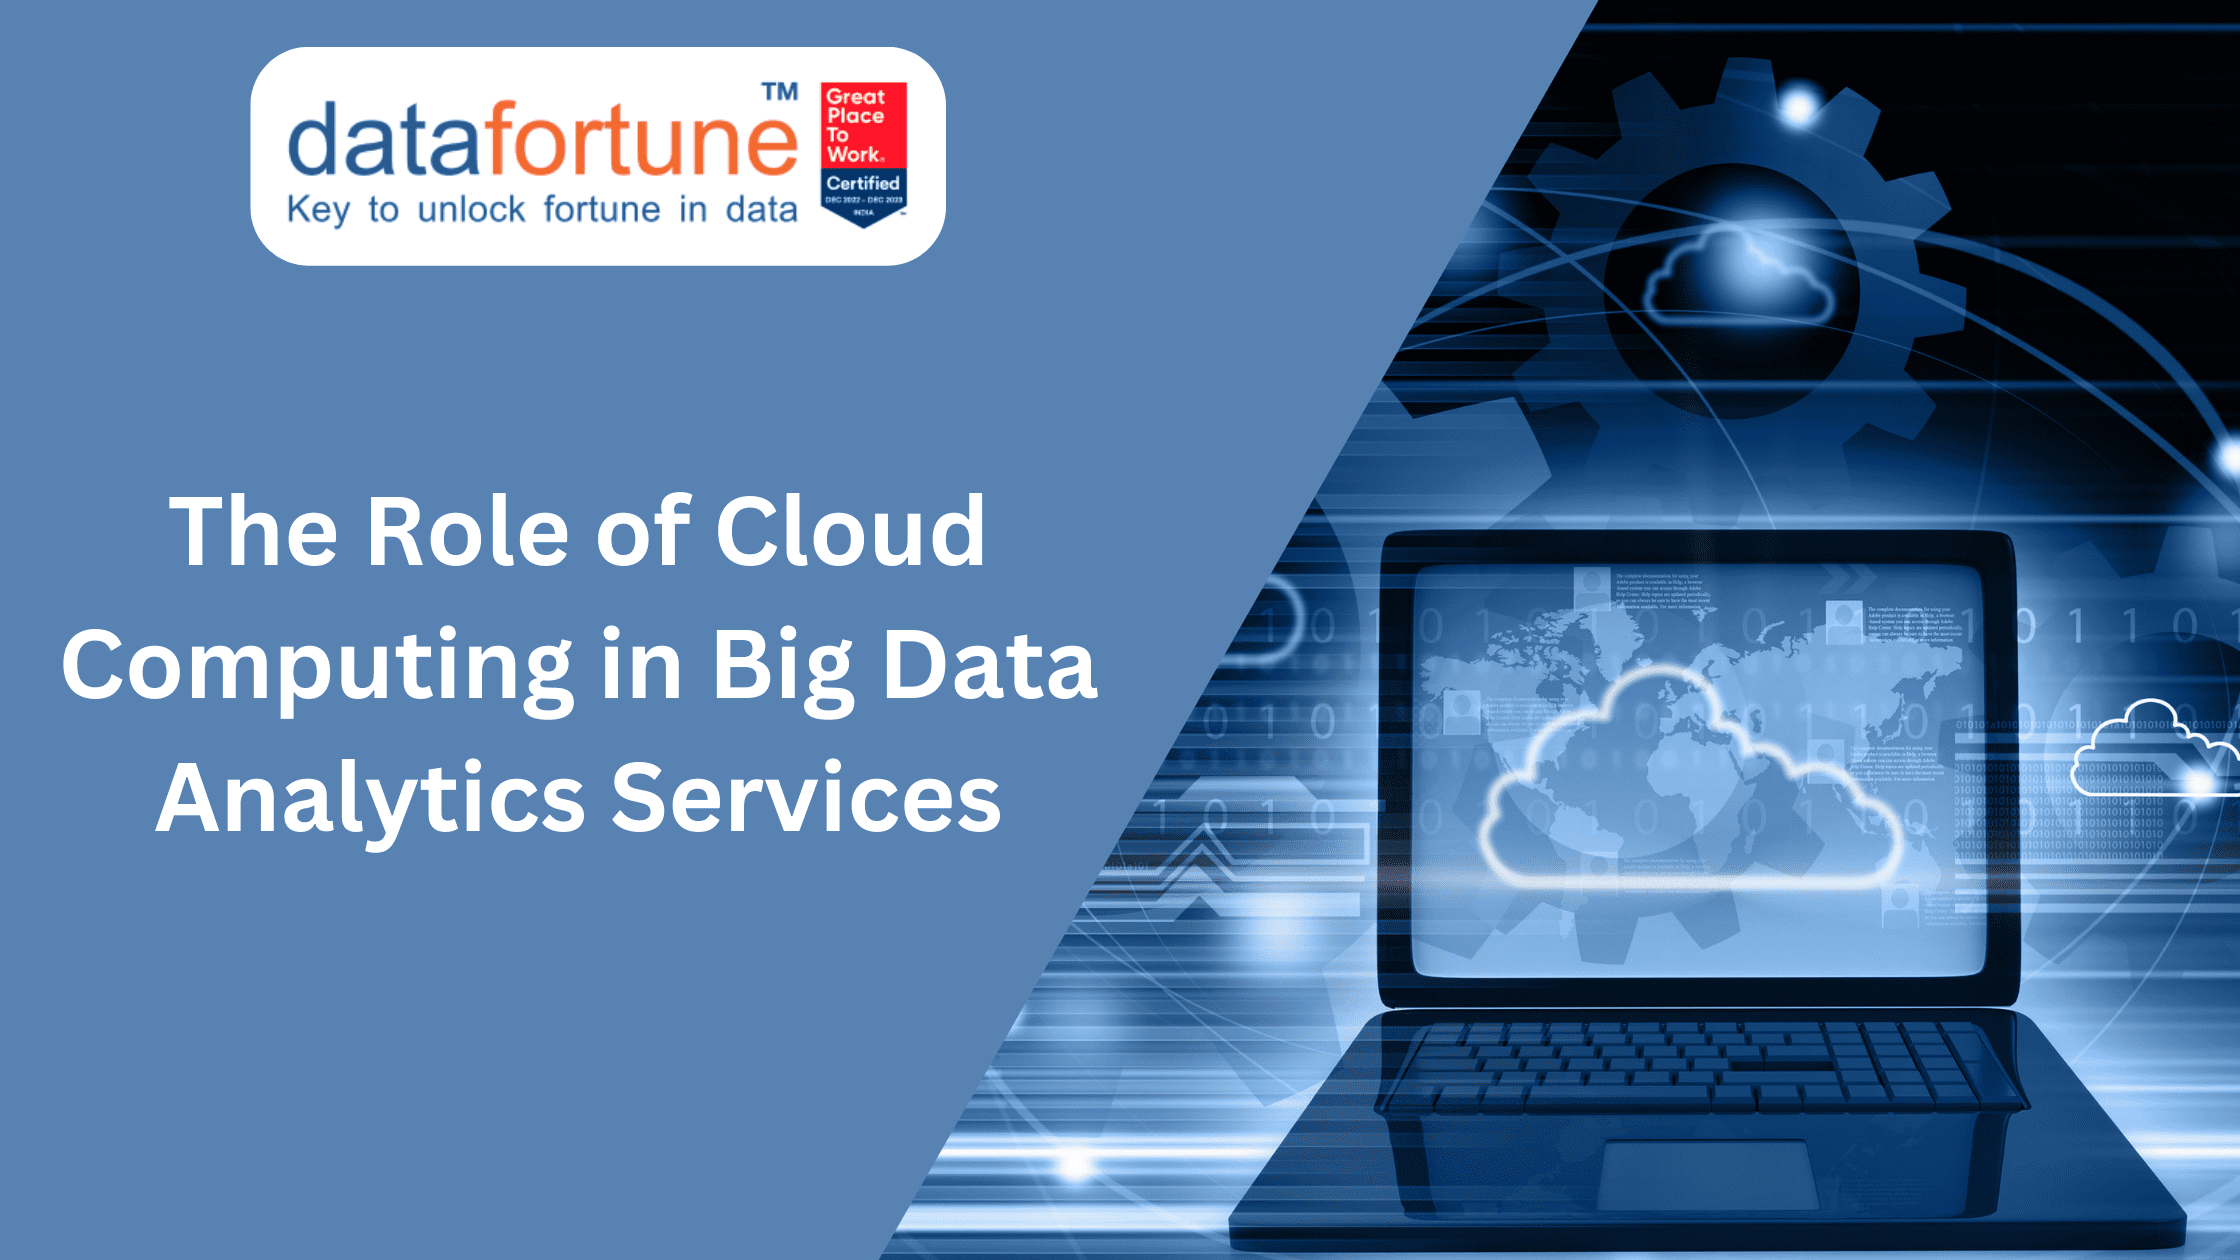 The Role of Cloud Computing in Big Data Analytics Services